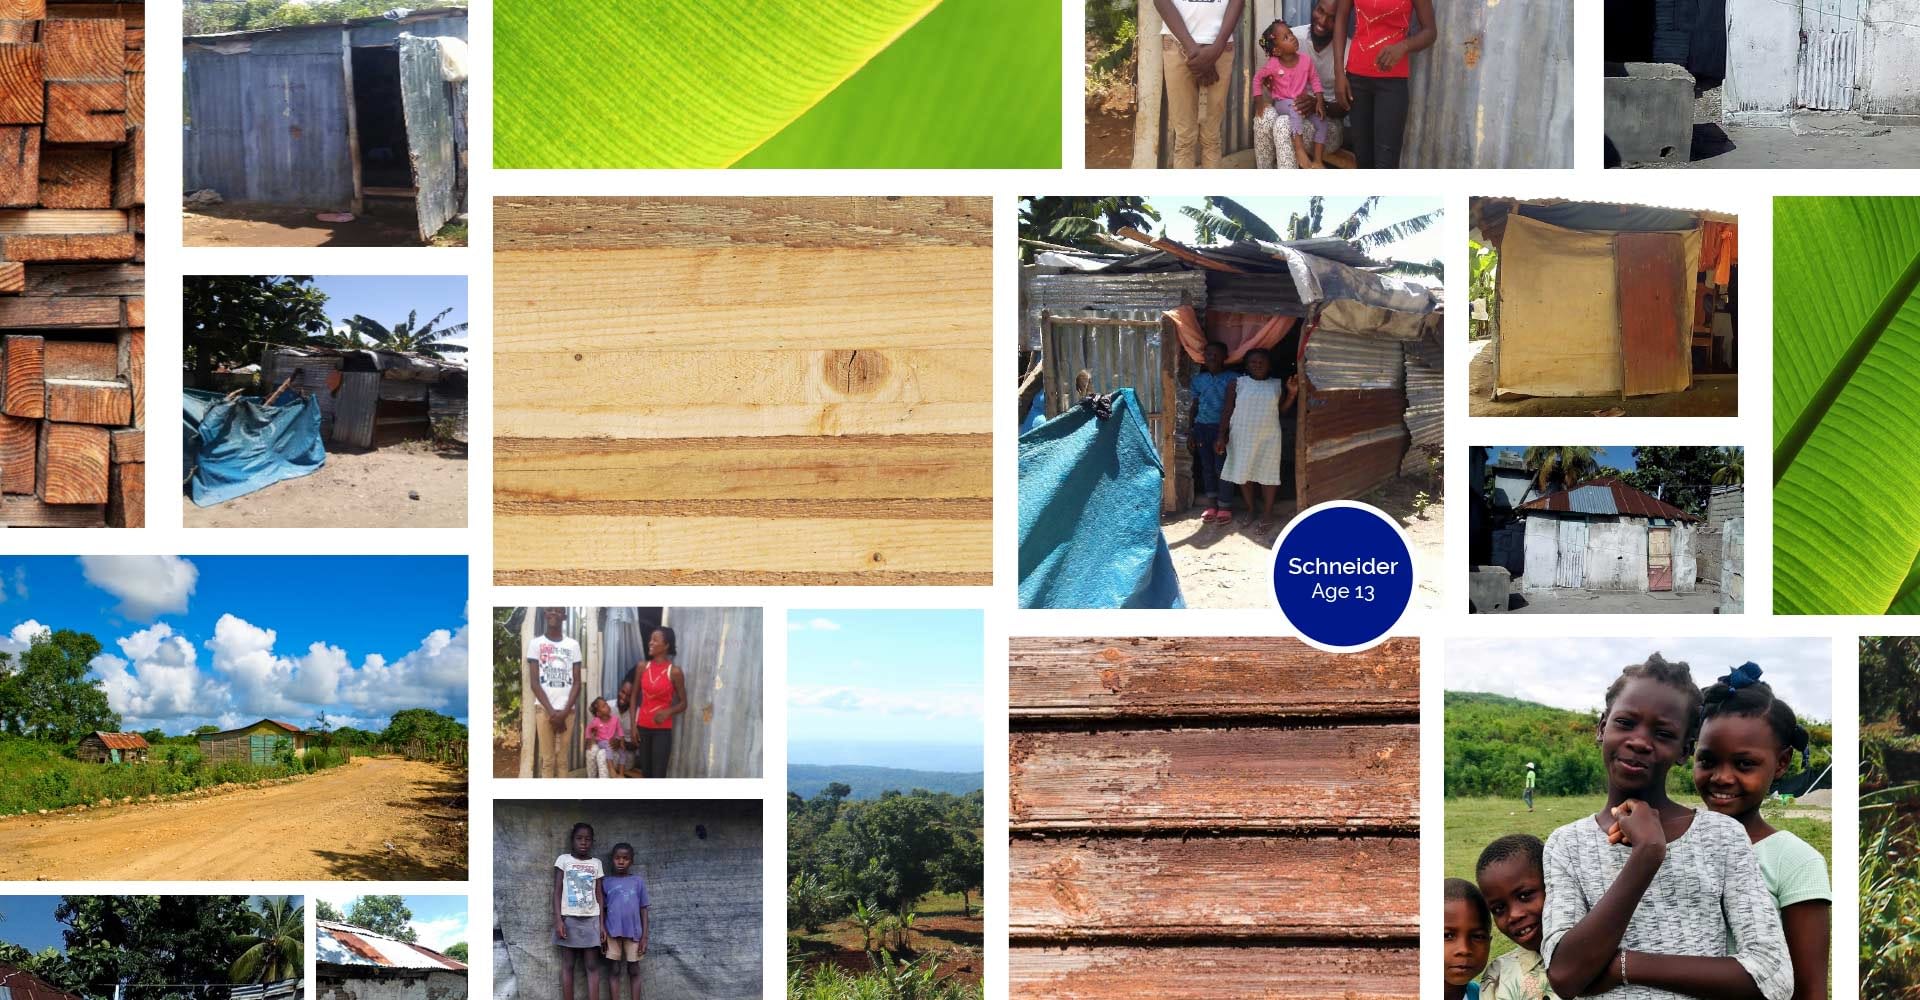 A photo collage of Schneider's home and family in Haiti